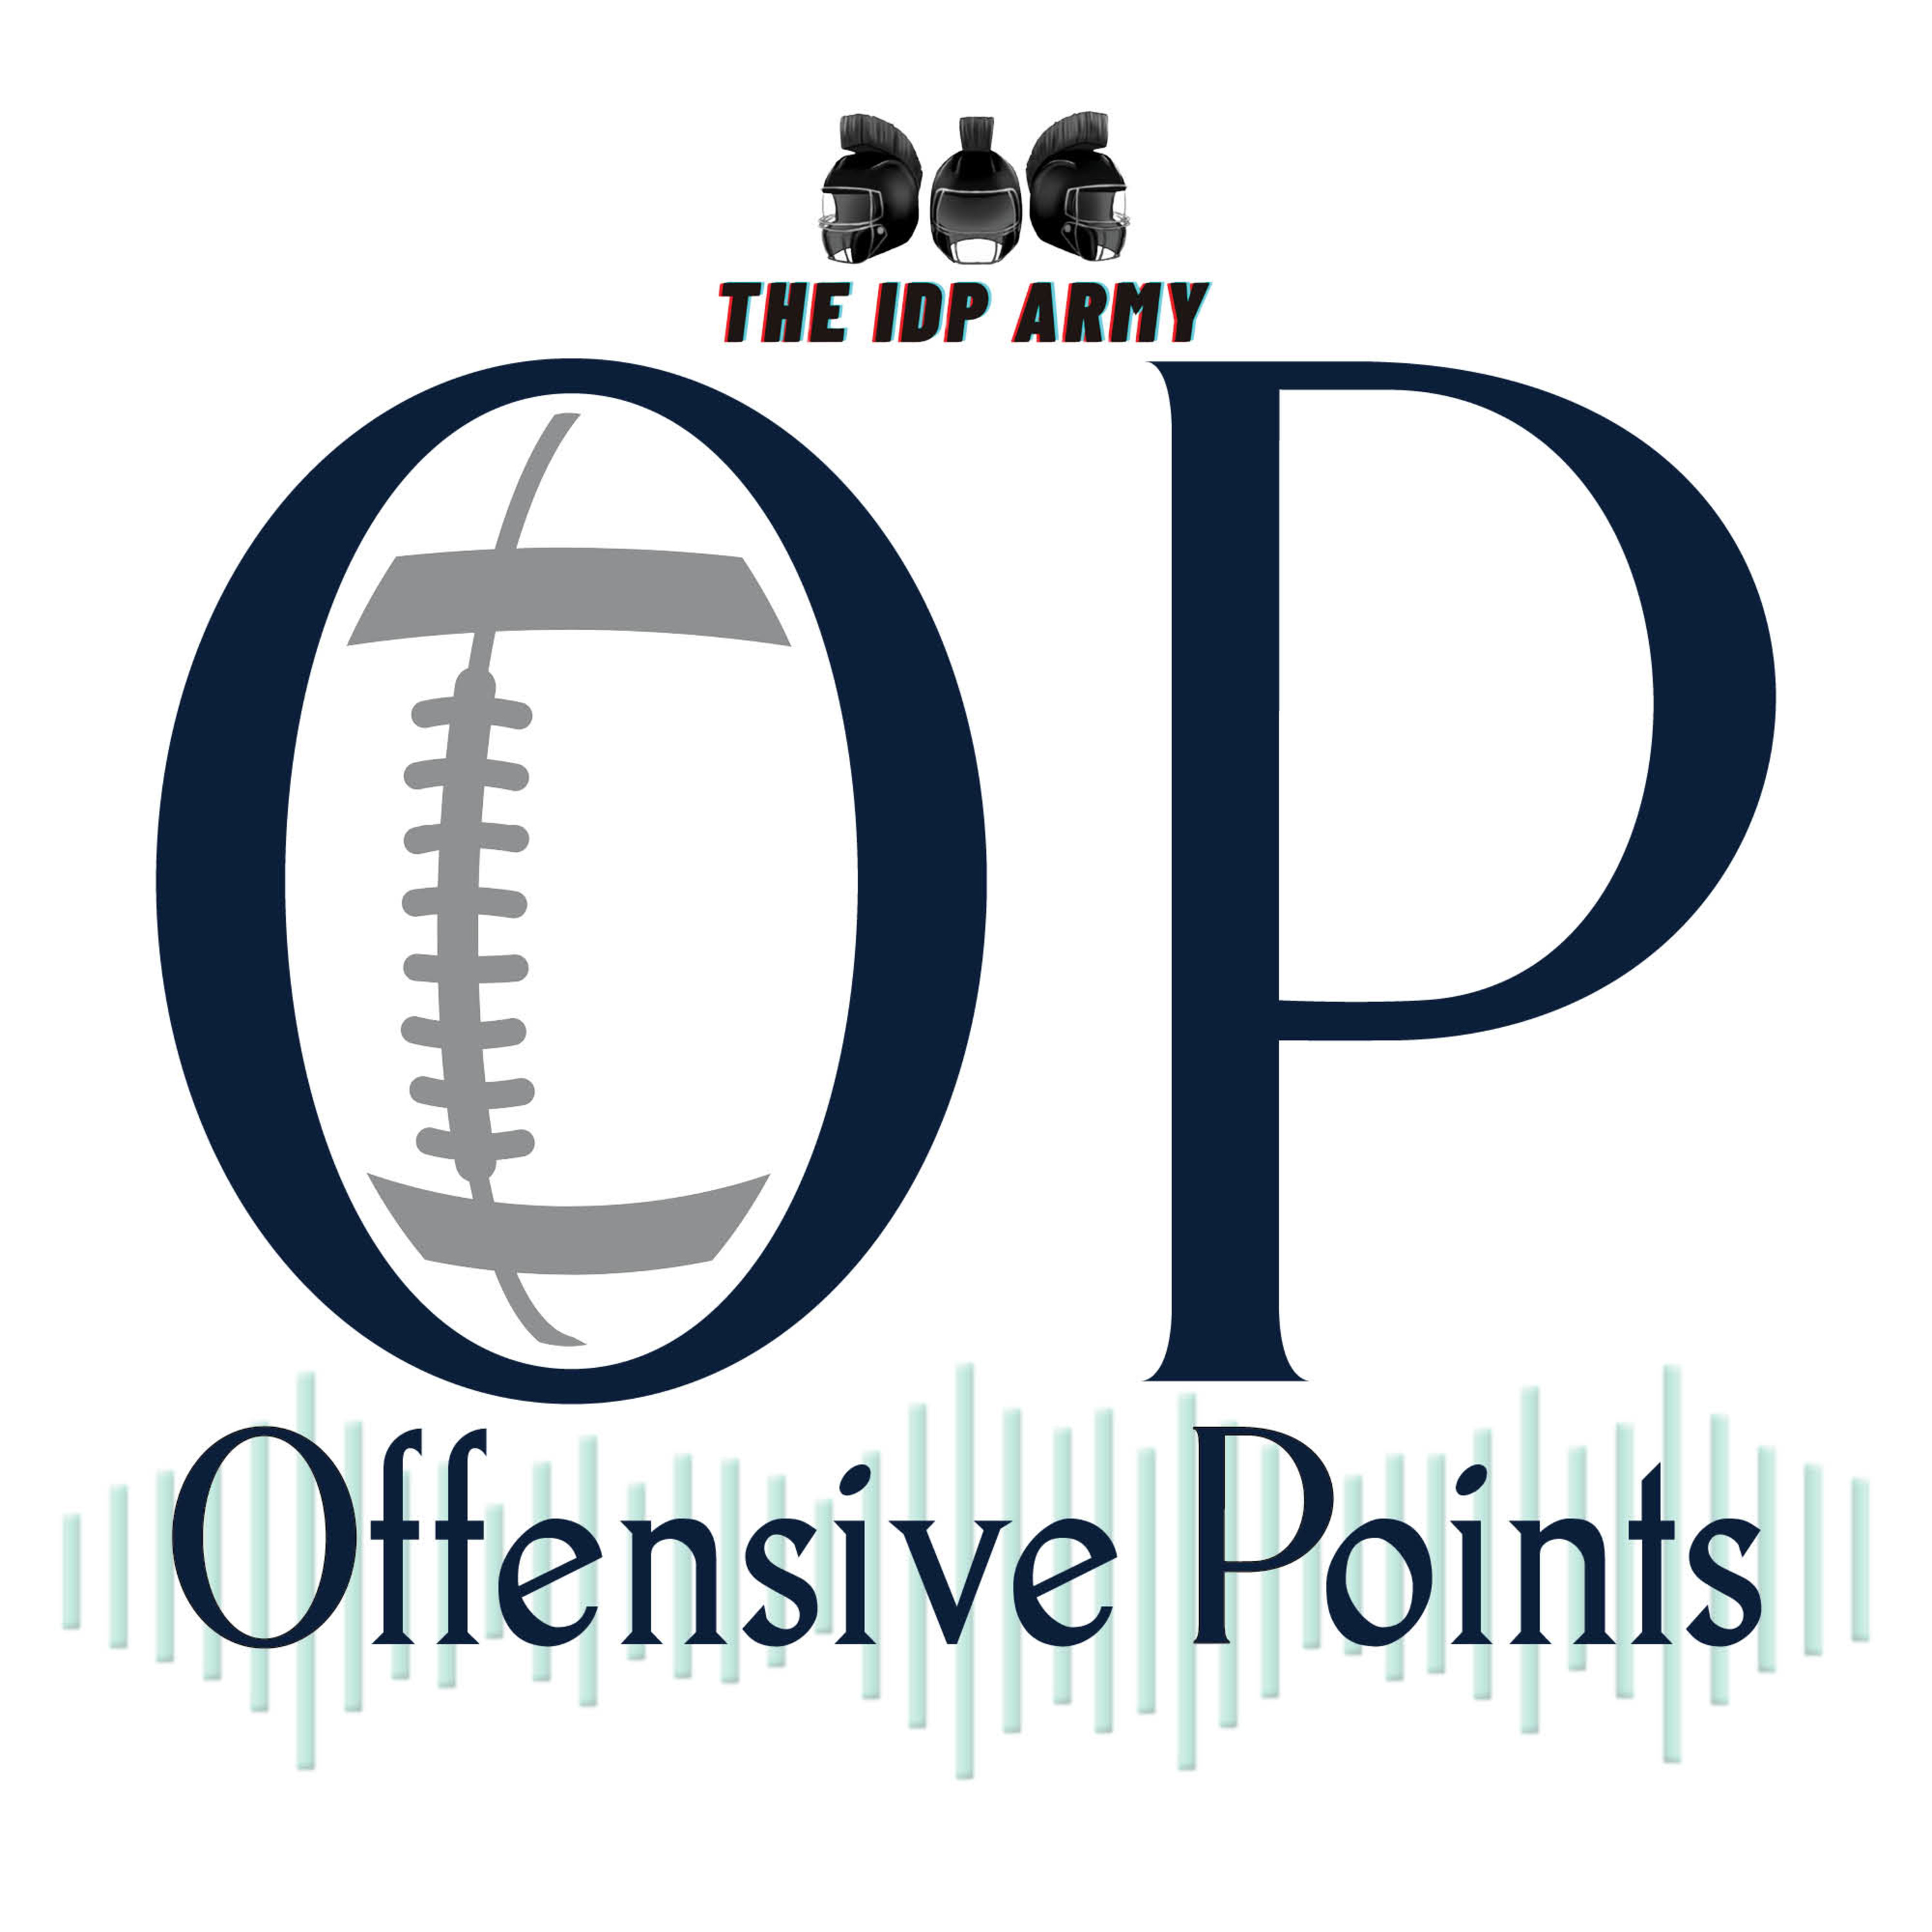 Offensive Points: The Circle